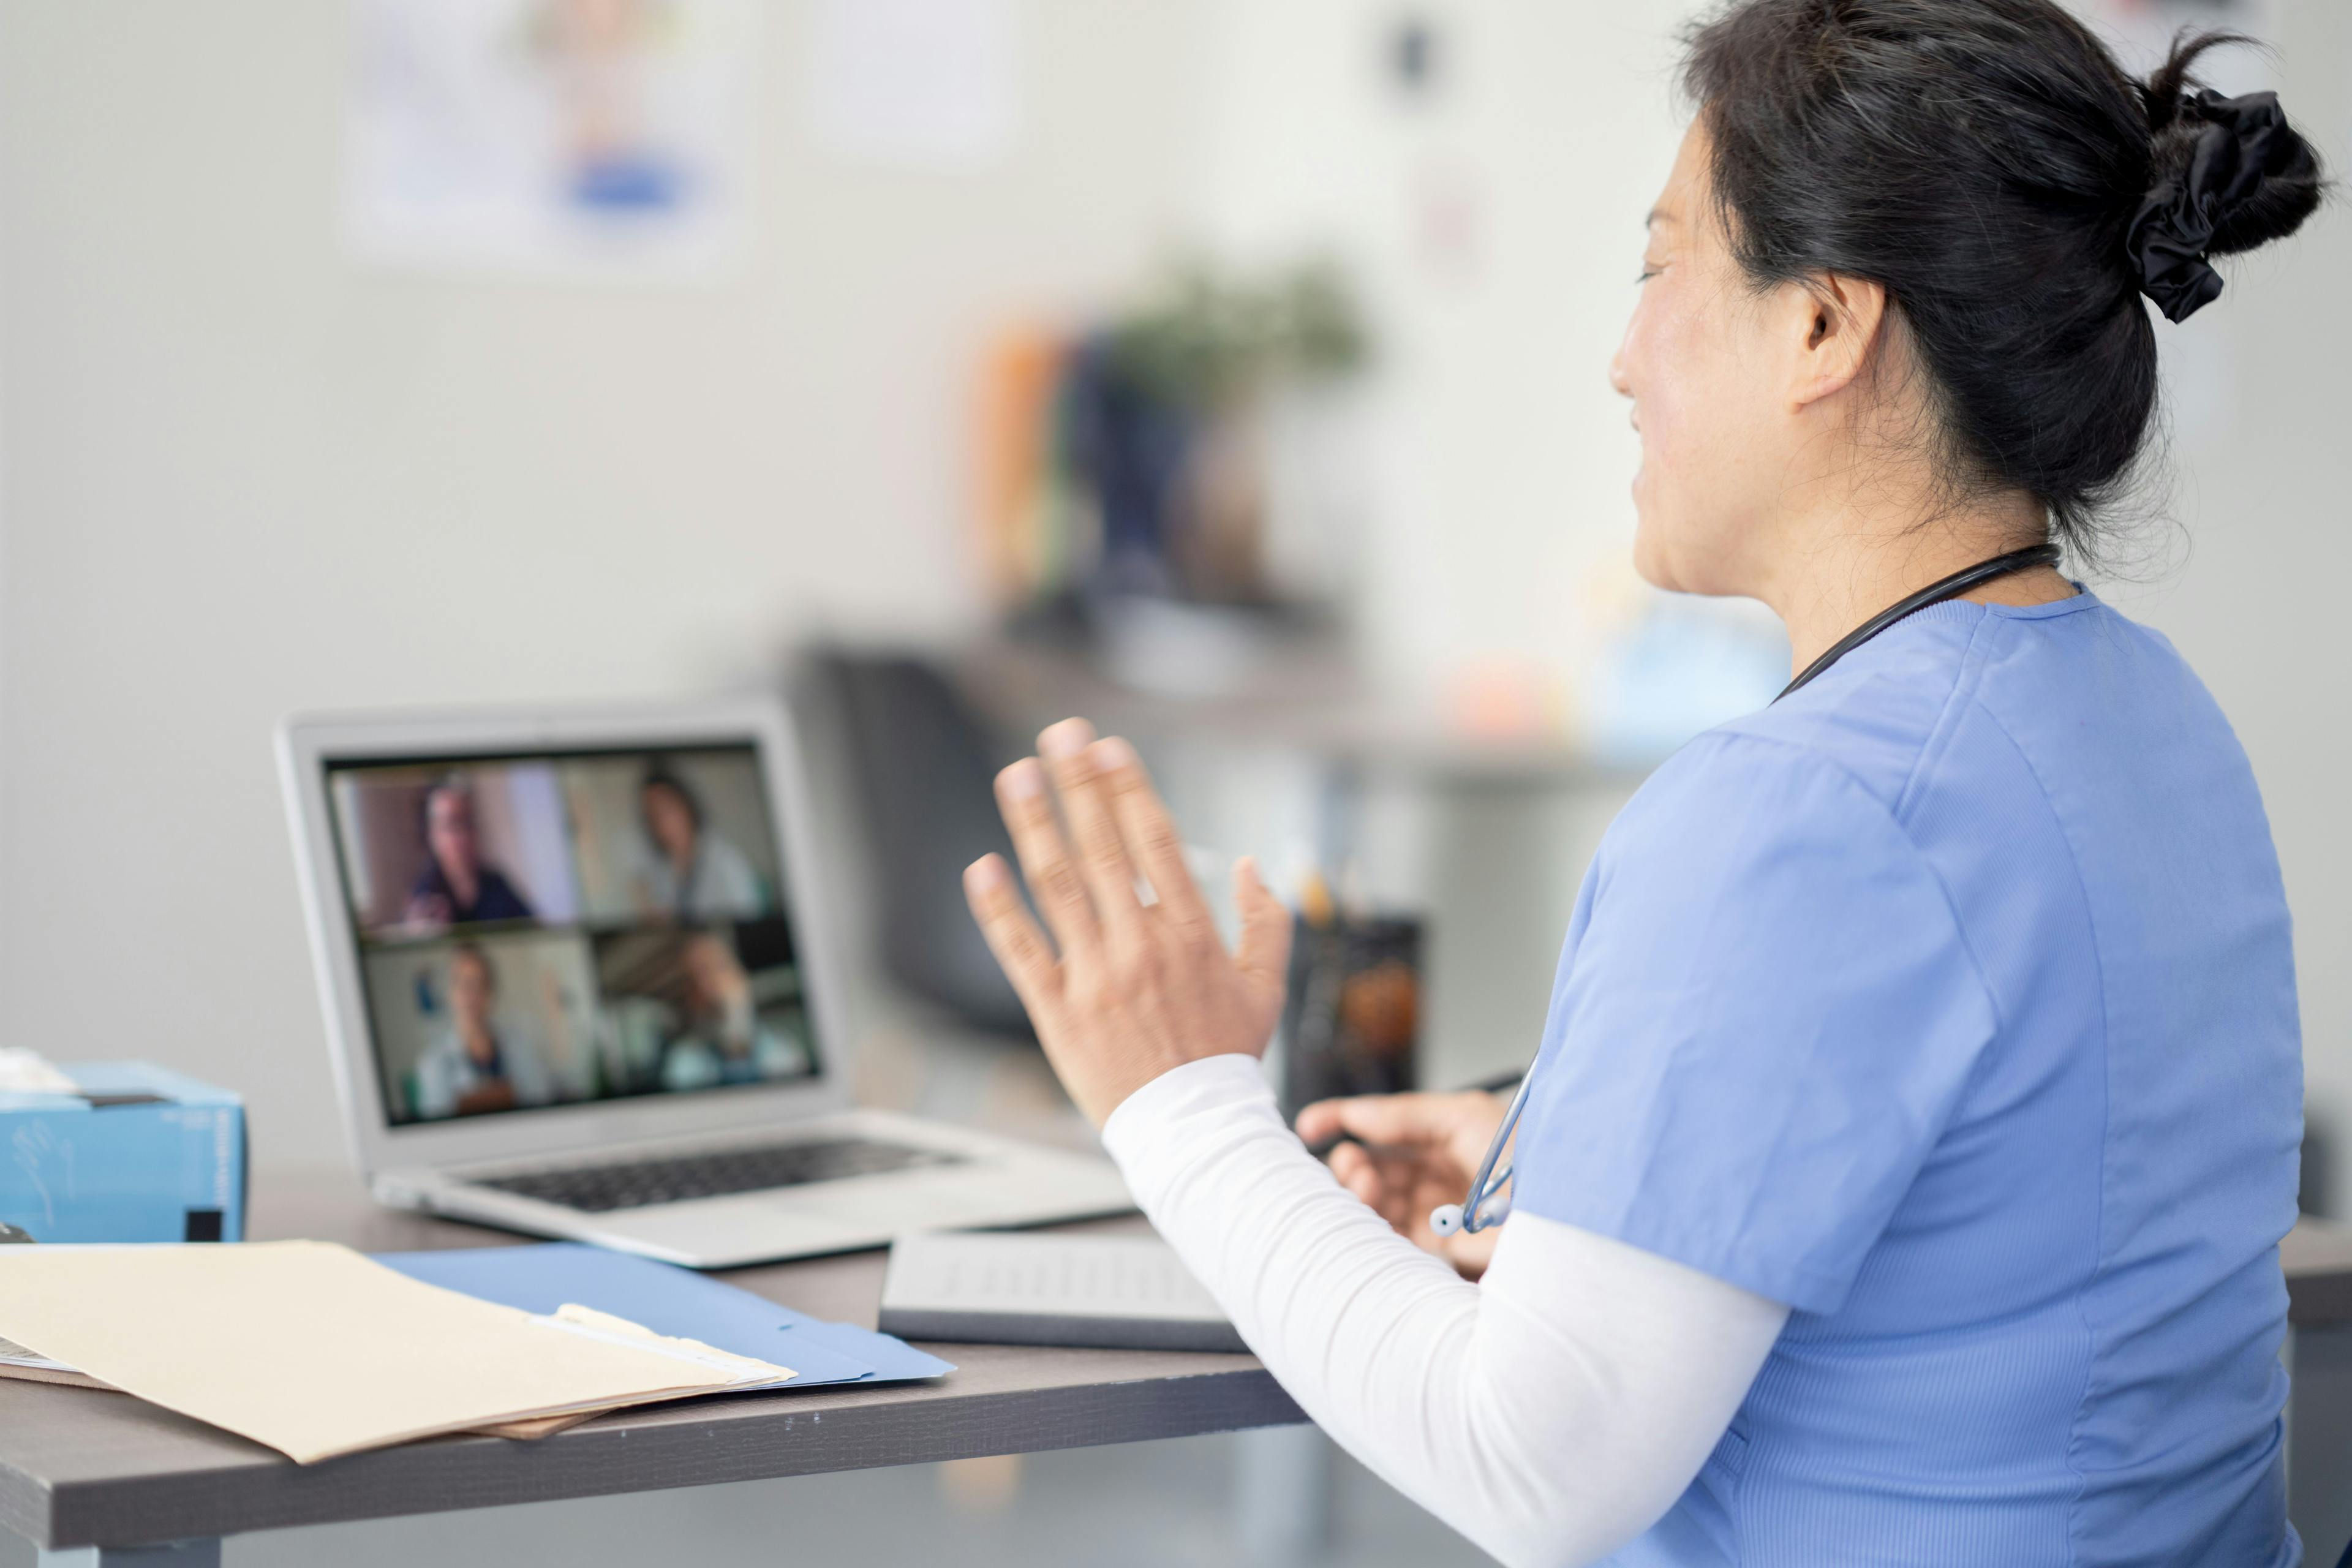 A medical professional video conferences with others on her laptop.